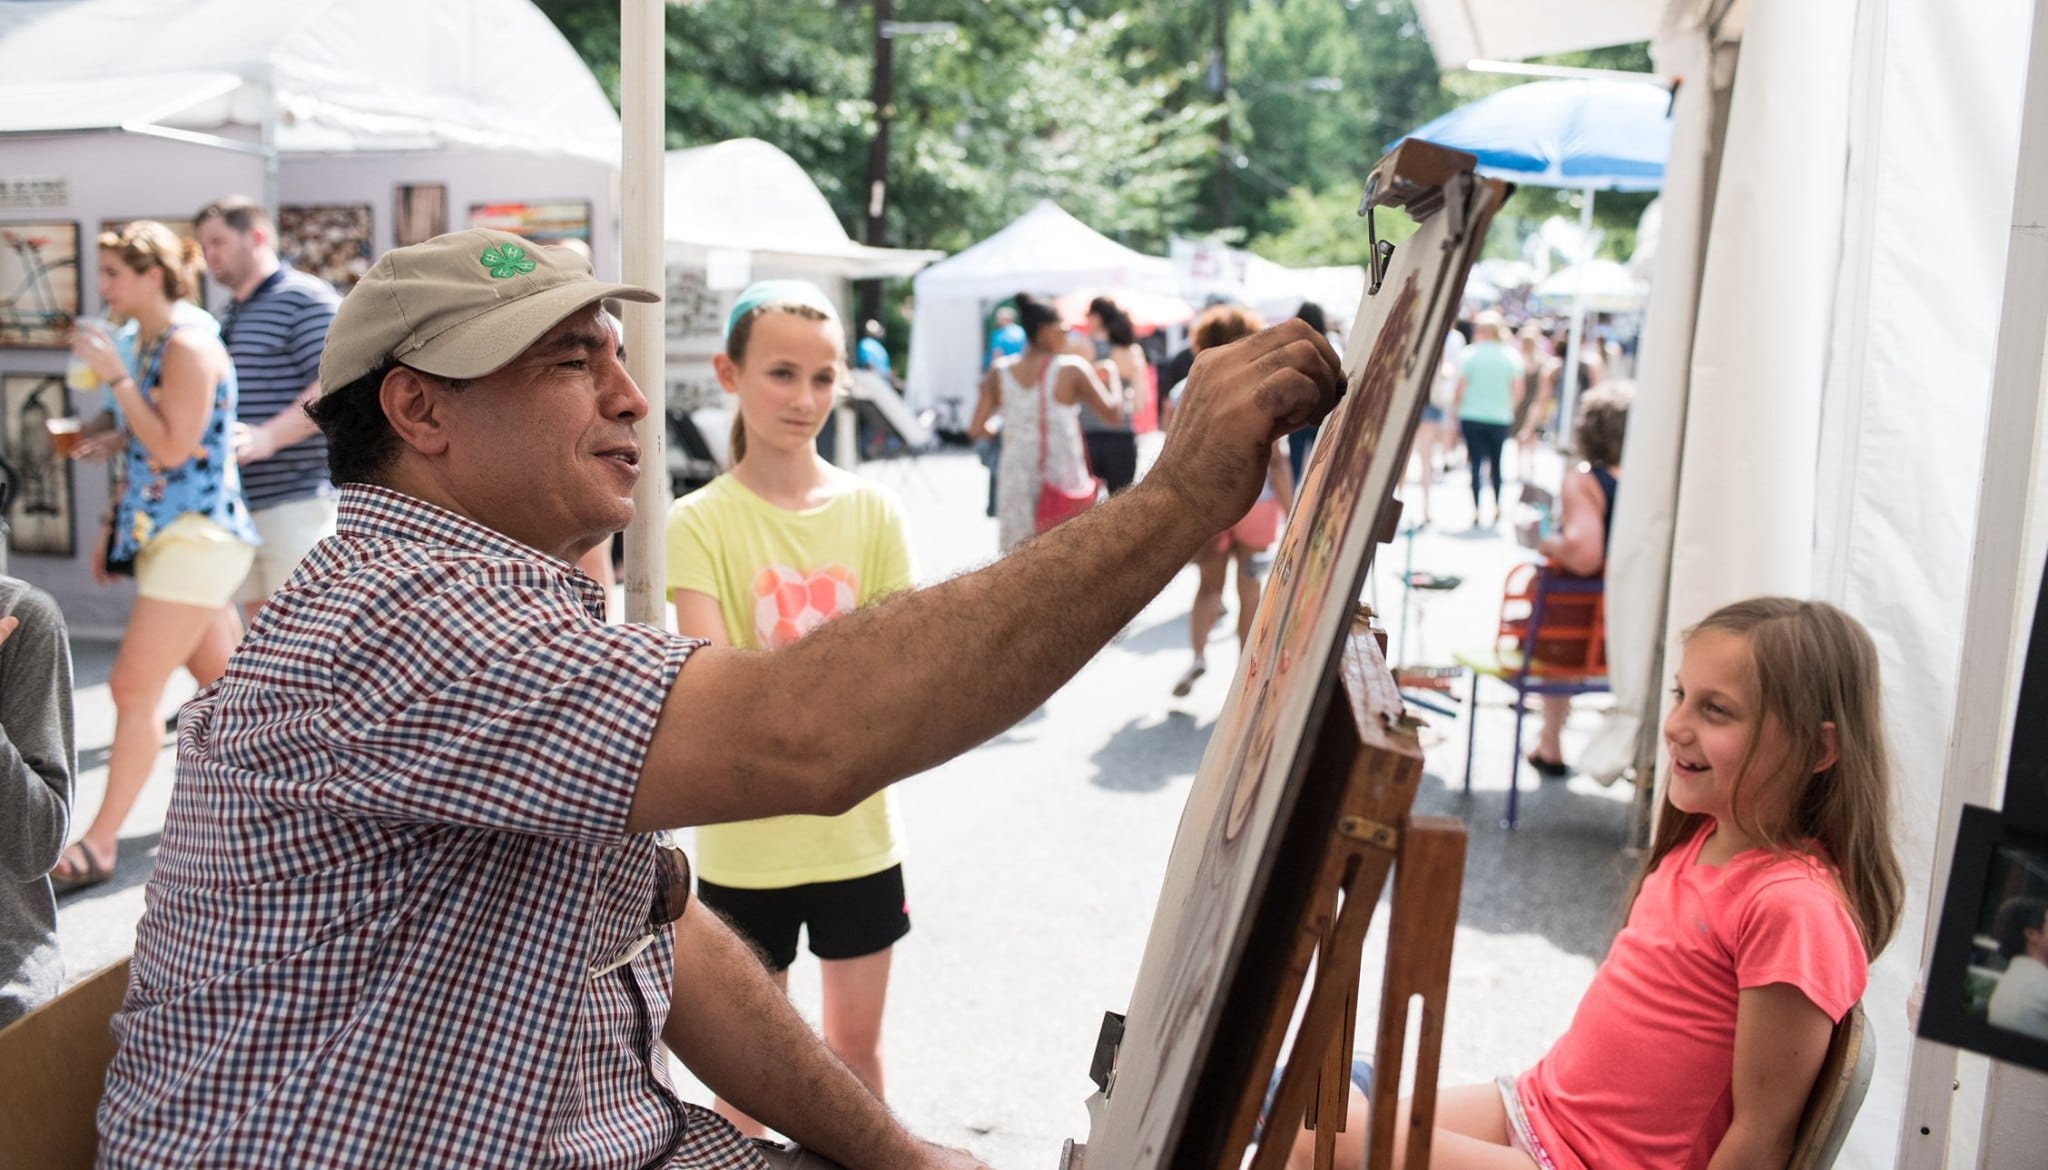 Everything You Need To Know About VirginiaHighland's Artsy Summerfest